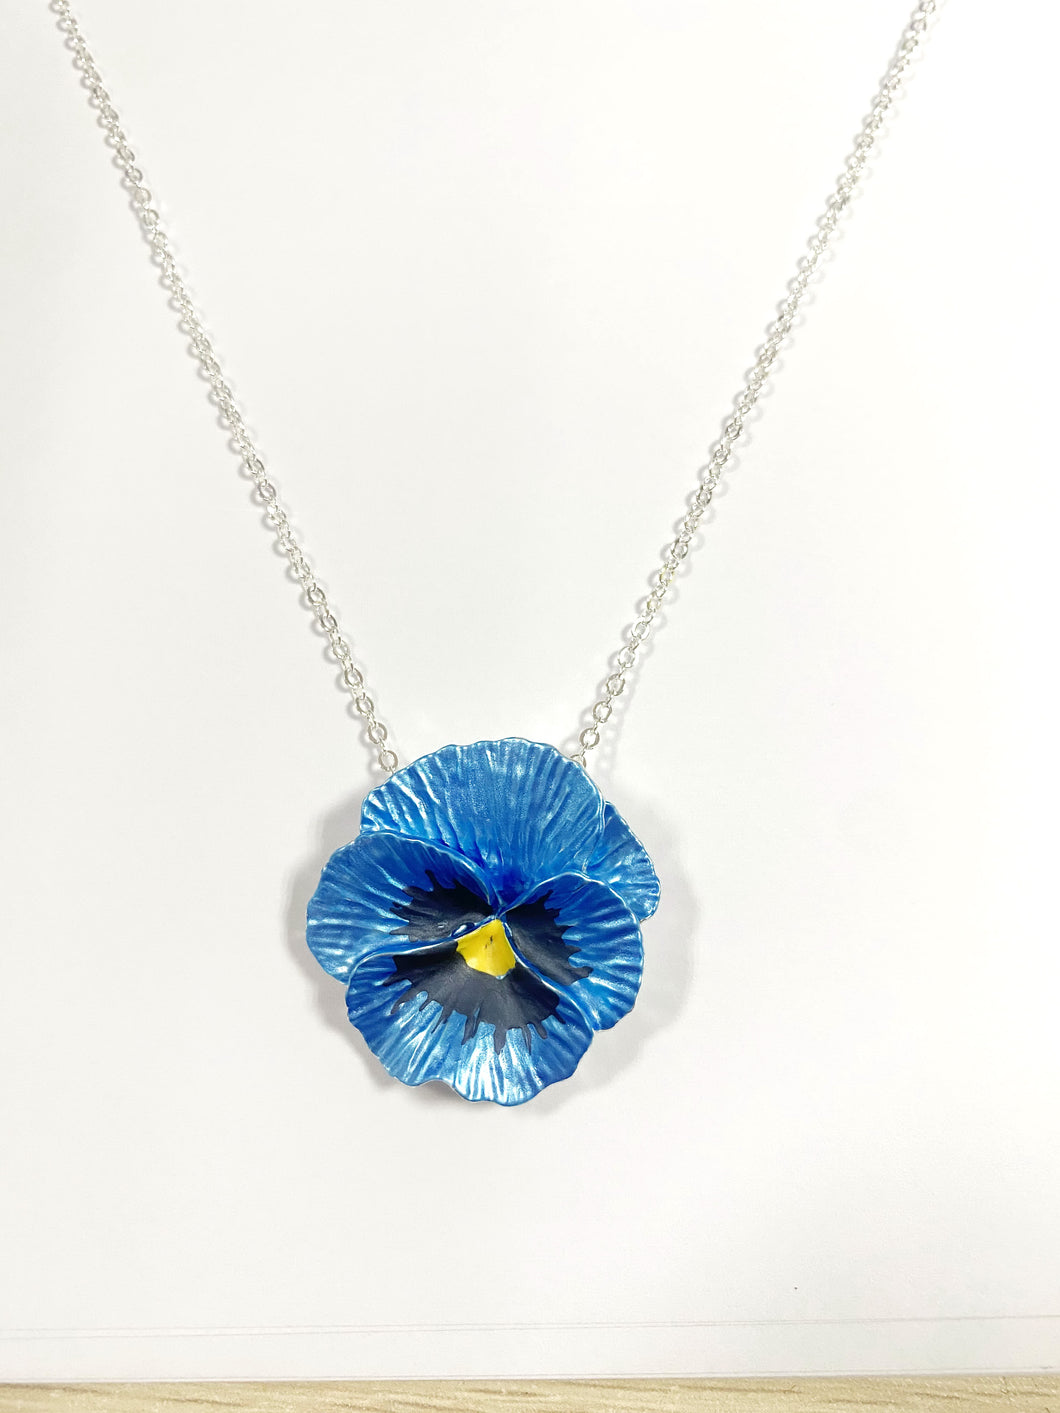 Blue pansy pendant and chain. Clearance sale